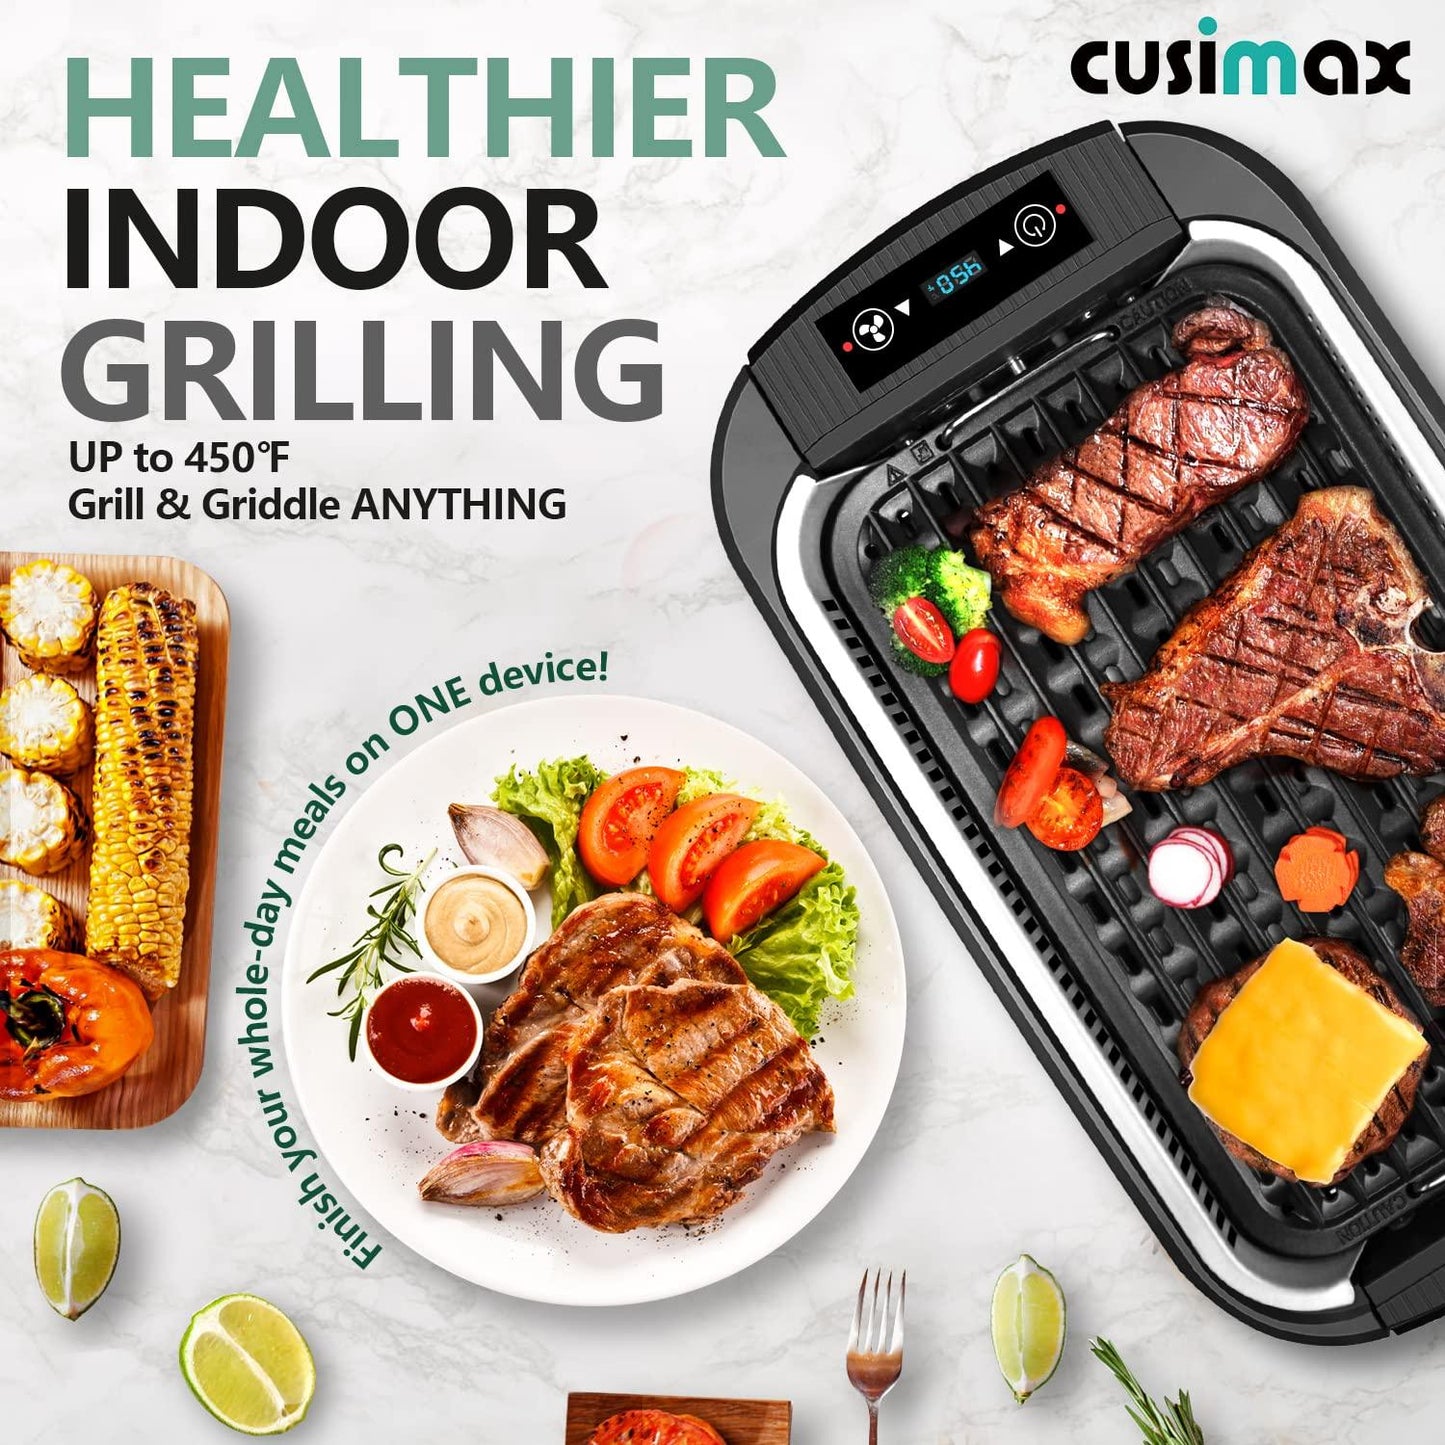 Indoor Grill, CUSIMAX Smokeless Grill Indoor, 1500W Electric Grill Griddle Korean BBQ Grill with LED Smart Display & Tempered Glass Lid, Non-stick Removable Grill Plate & Griddle Plate, Black - CookCave